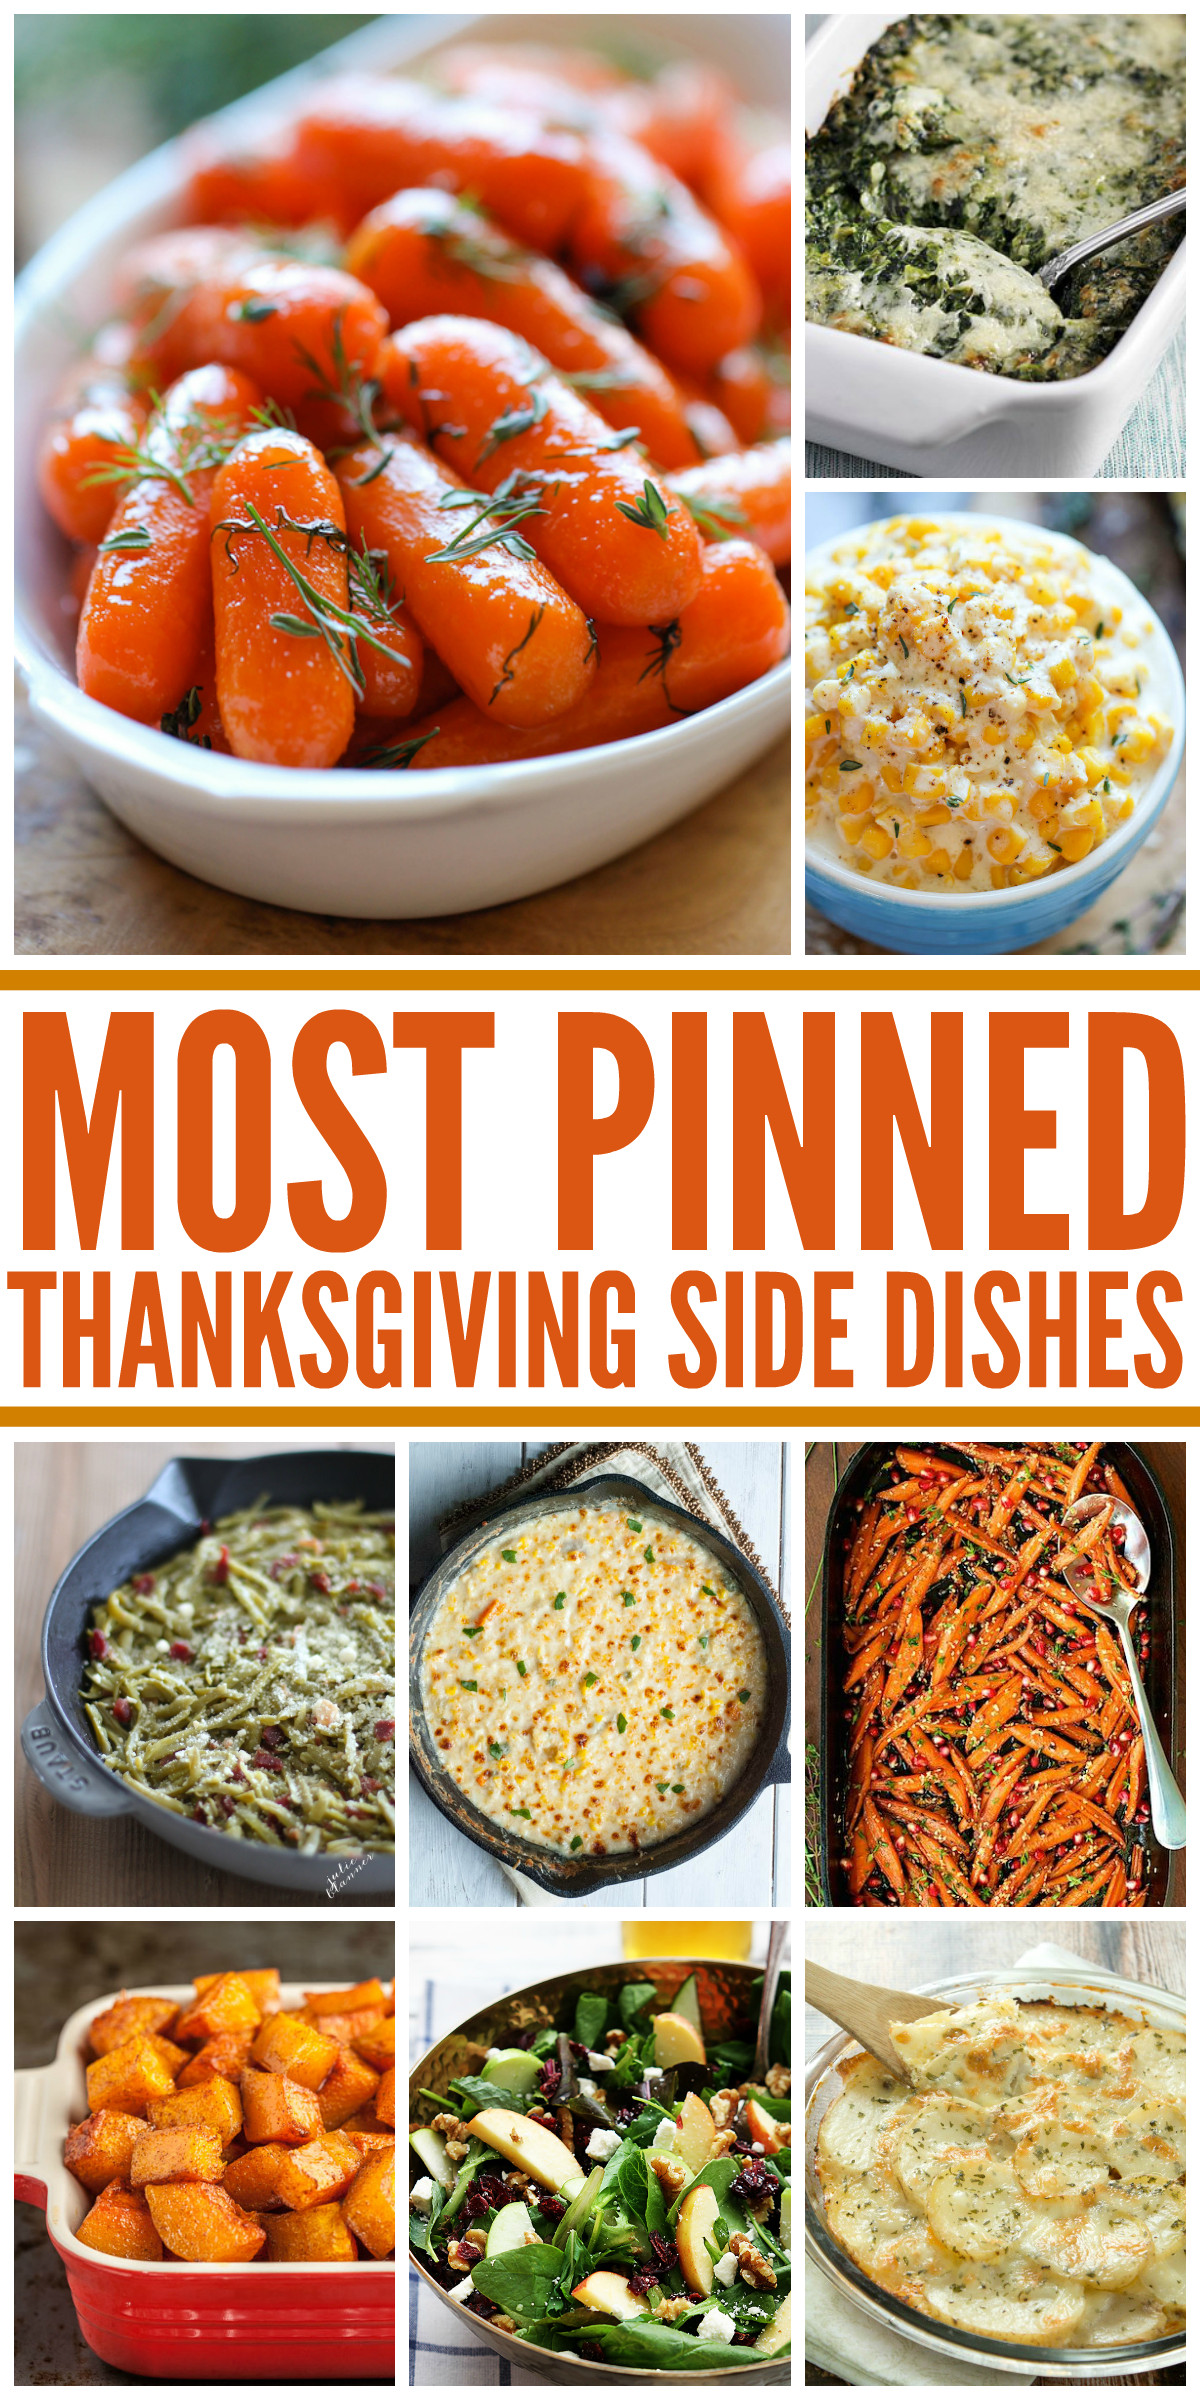 Thanksgiving Side Dishes
 25 Most Pinned Side Dish Recipes for Thanksgiving and